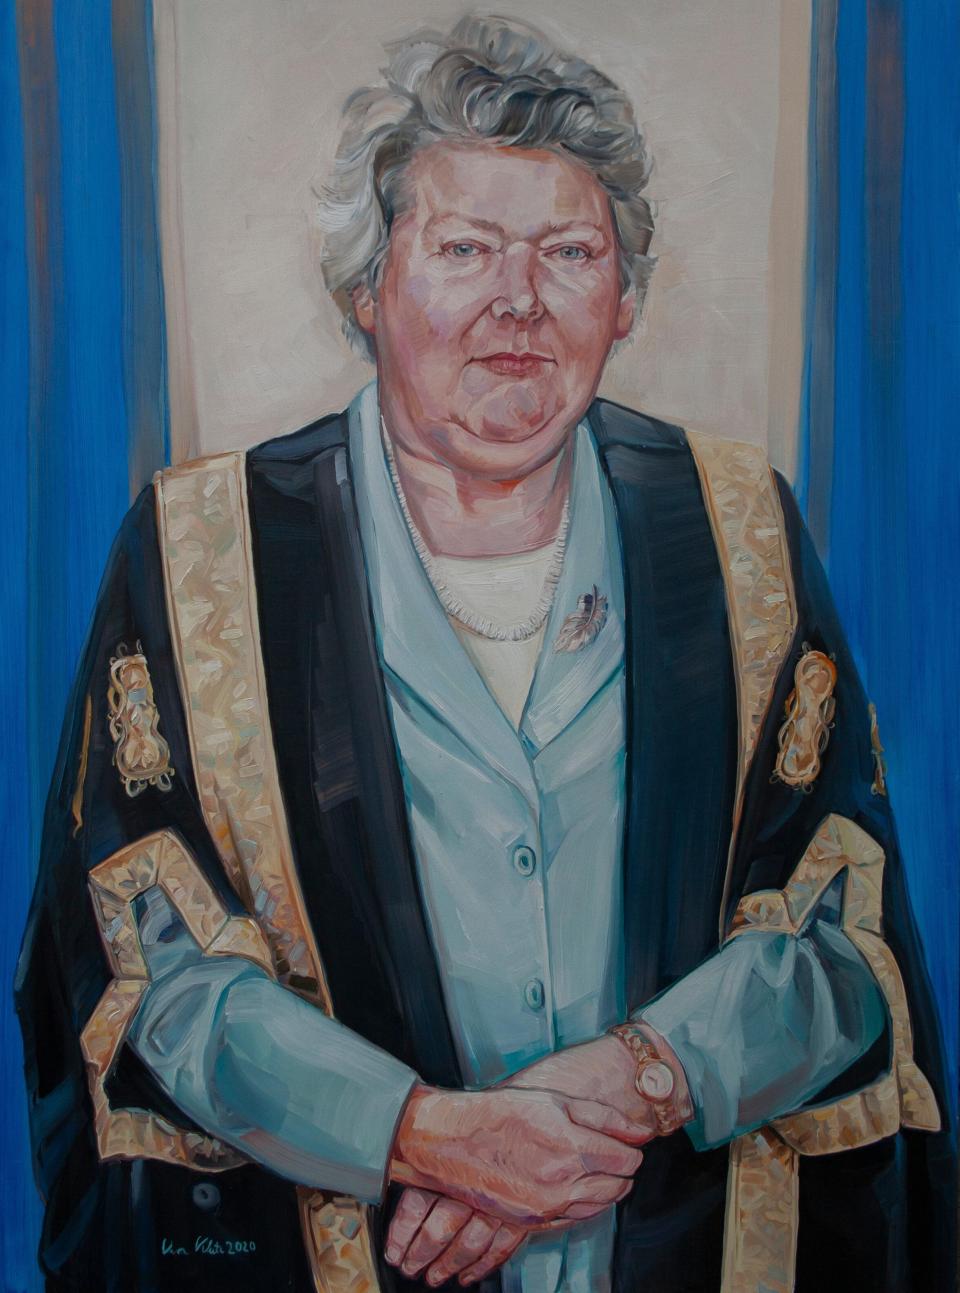 Ms Justice Mella Carroll - painting of a woman with grey hair wearing a Blue blouse and graduation gown